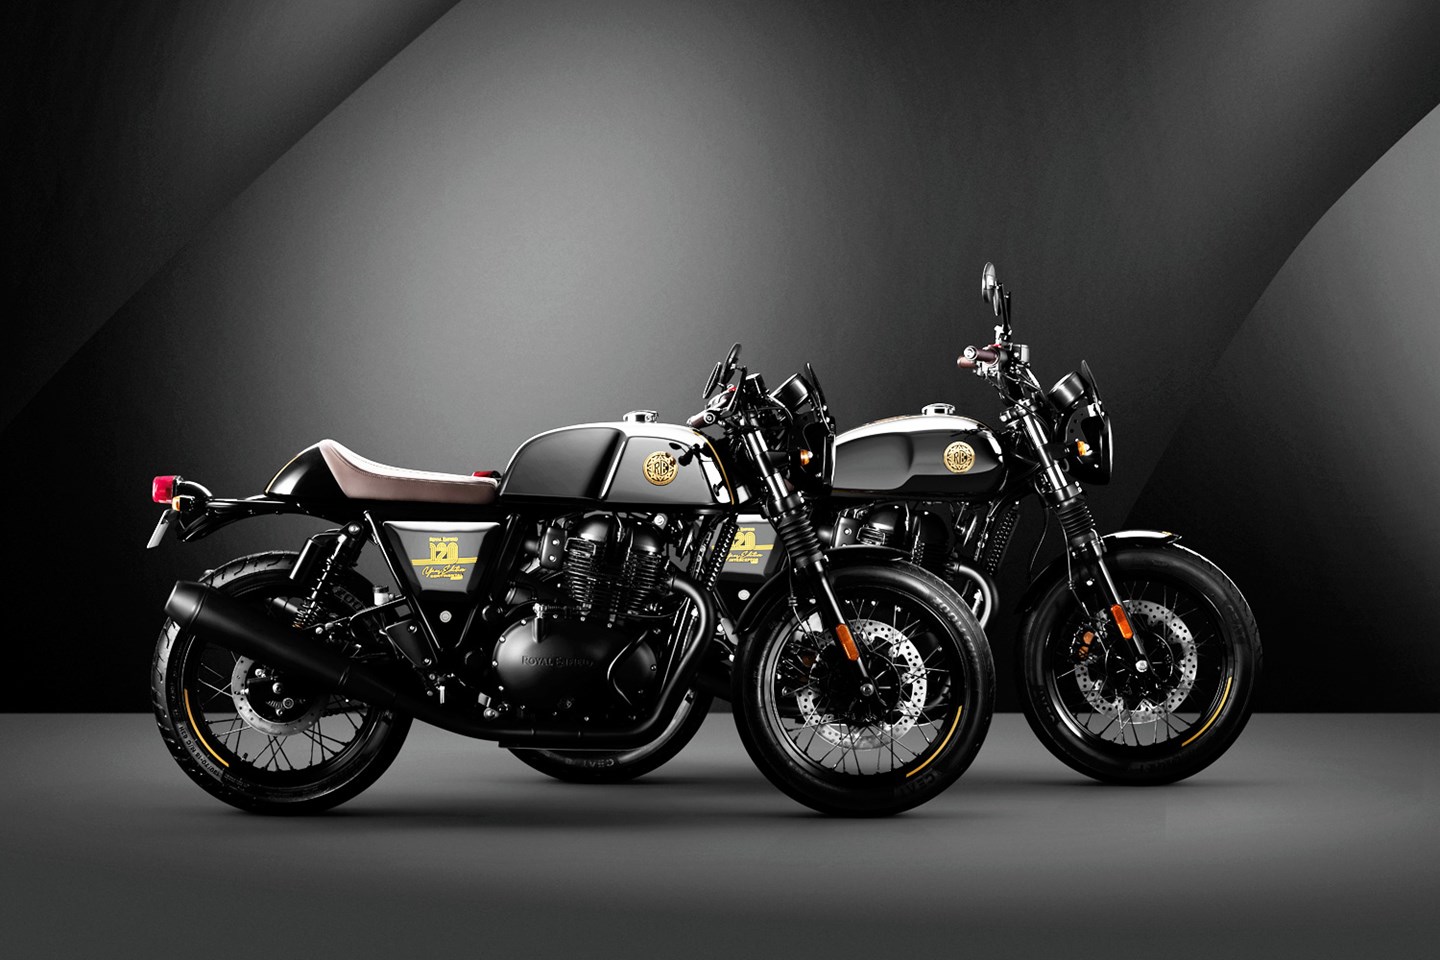 Royal Enfield commemorate 120th anniversary with special editions